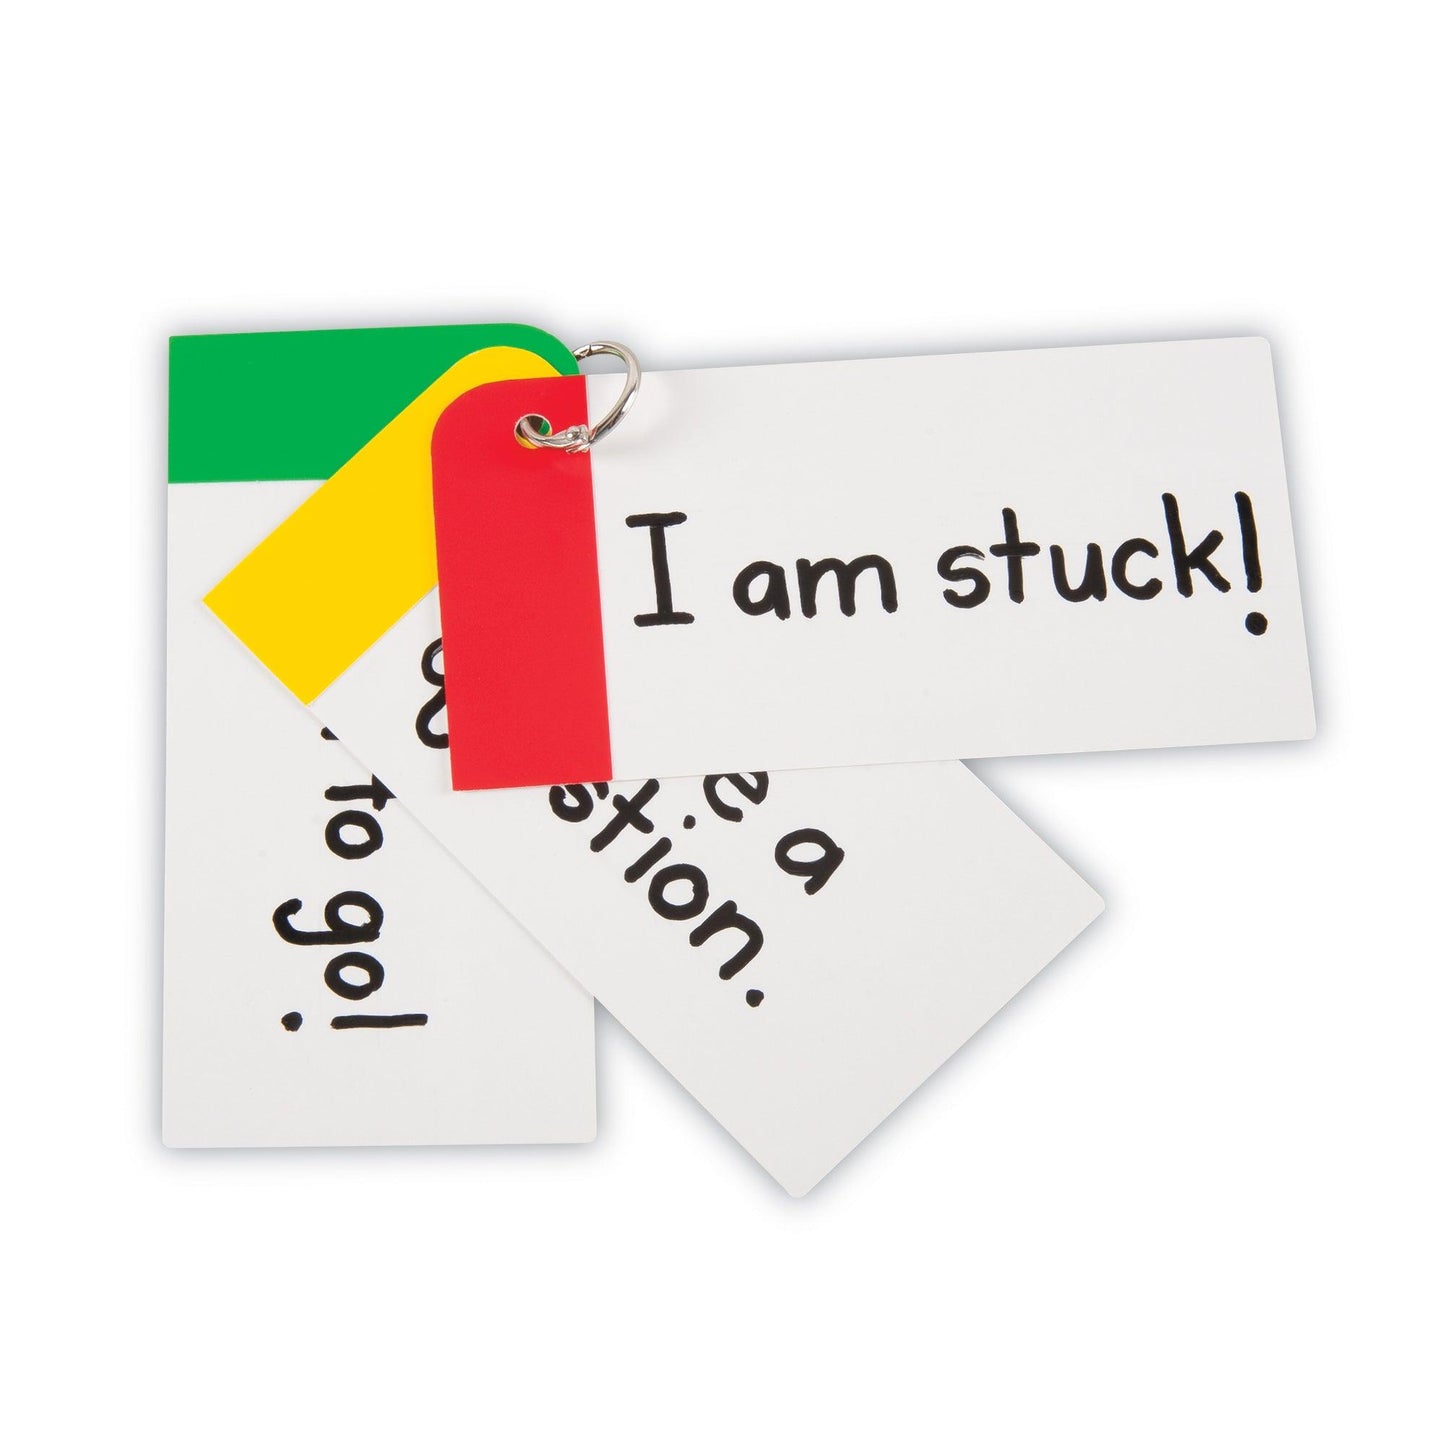 Make-Your-Own Skill Drill Flash Cards, 3 Packs - Loomini